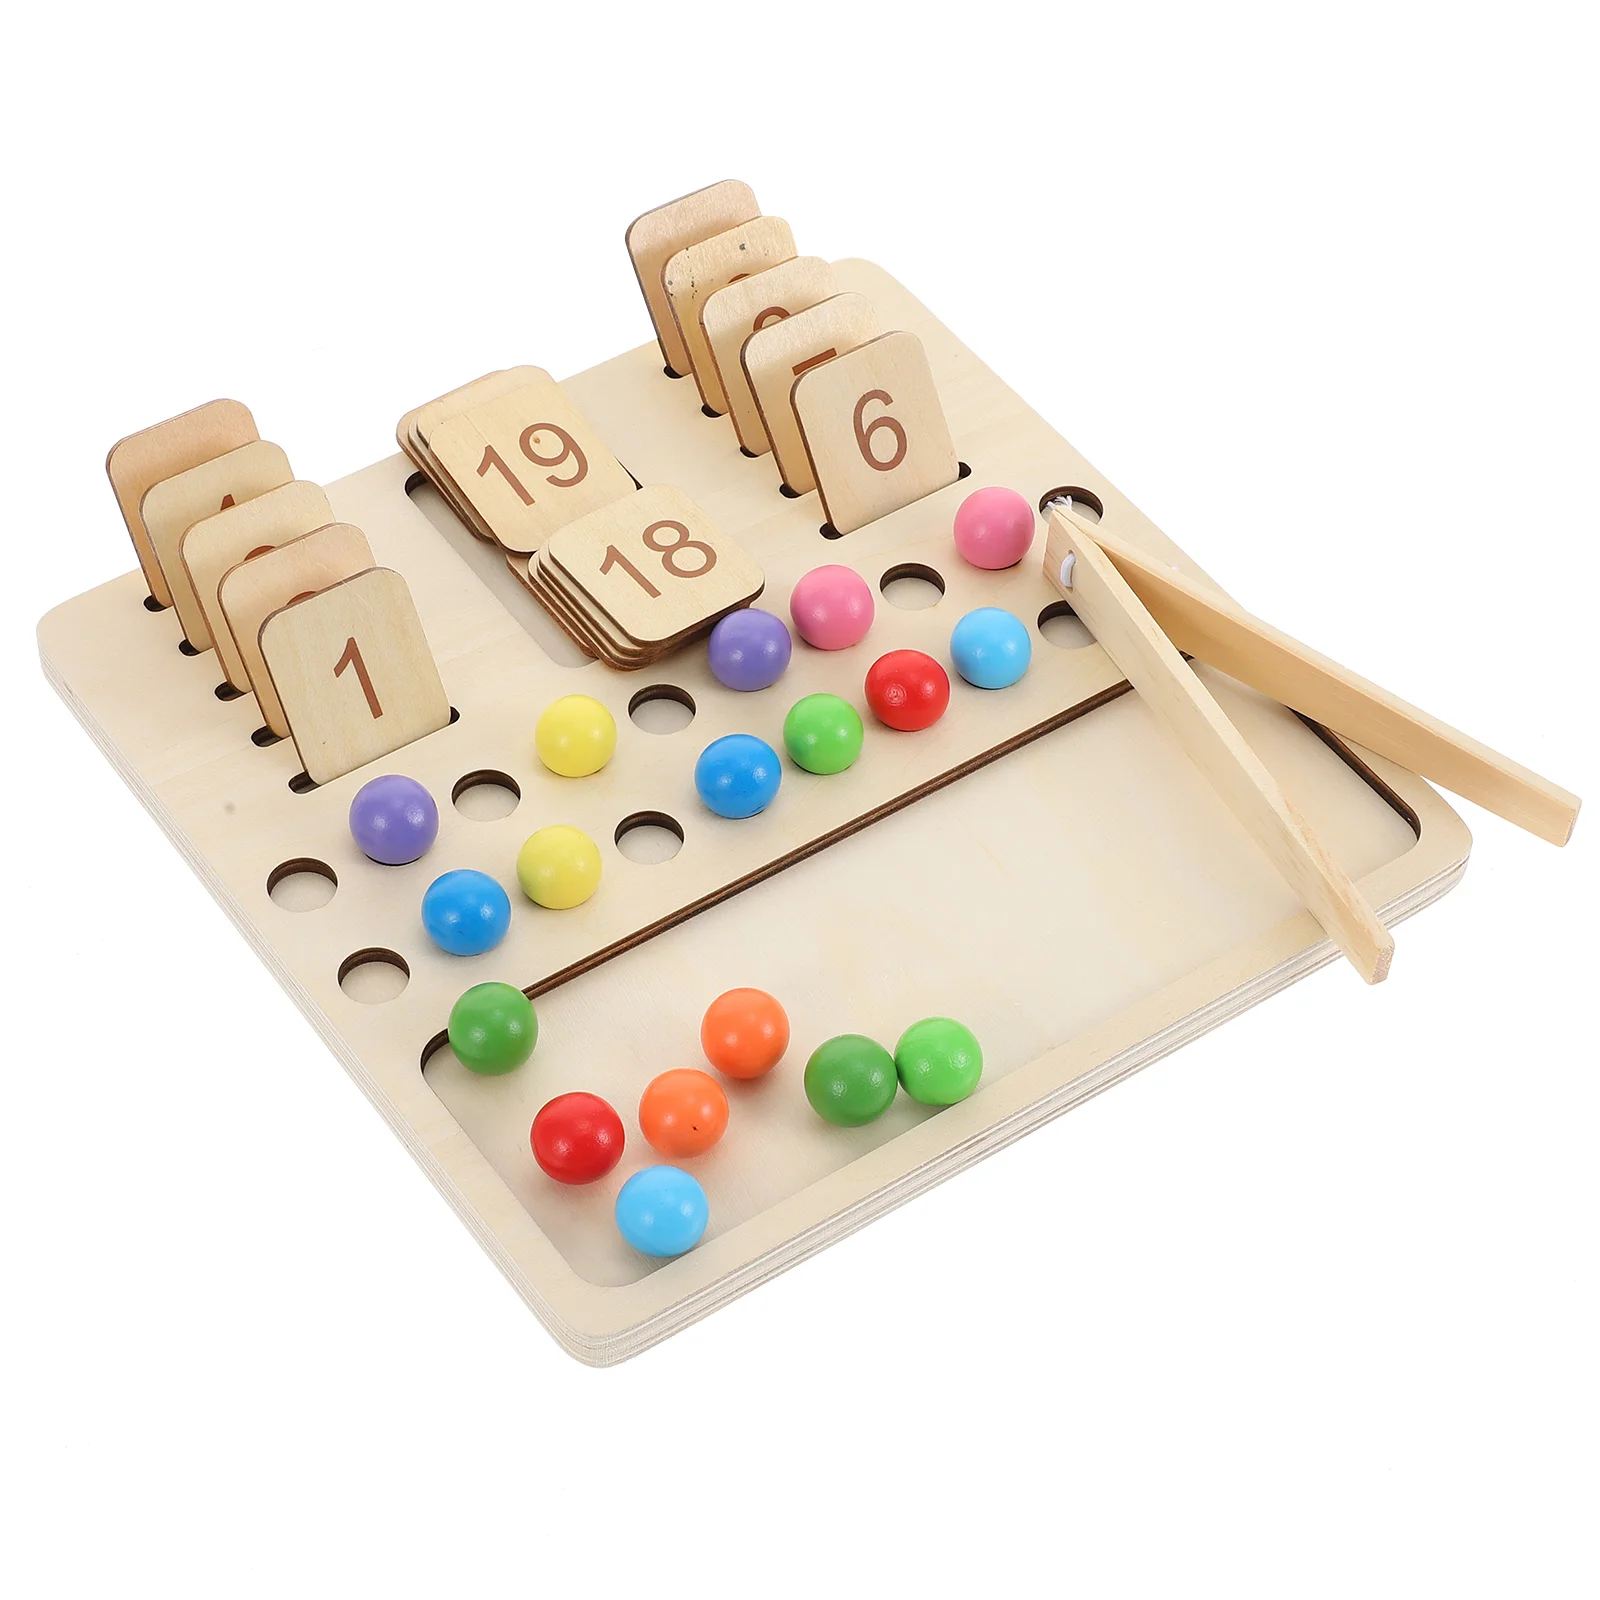 Digital Cognitive Board Toys Wooden Educational Teaching Supplies Playthings Aids Arithmetic Boards Math Learning digital cognitive board toys wooden educational teaching supplies playthings aids arithmetic boards math learning